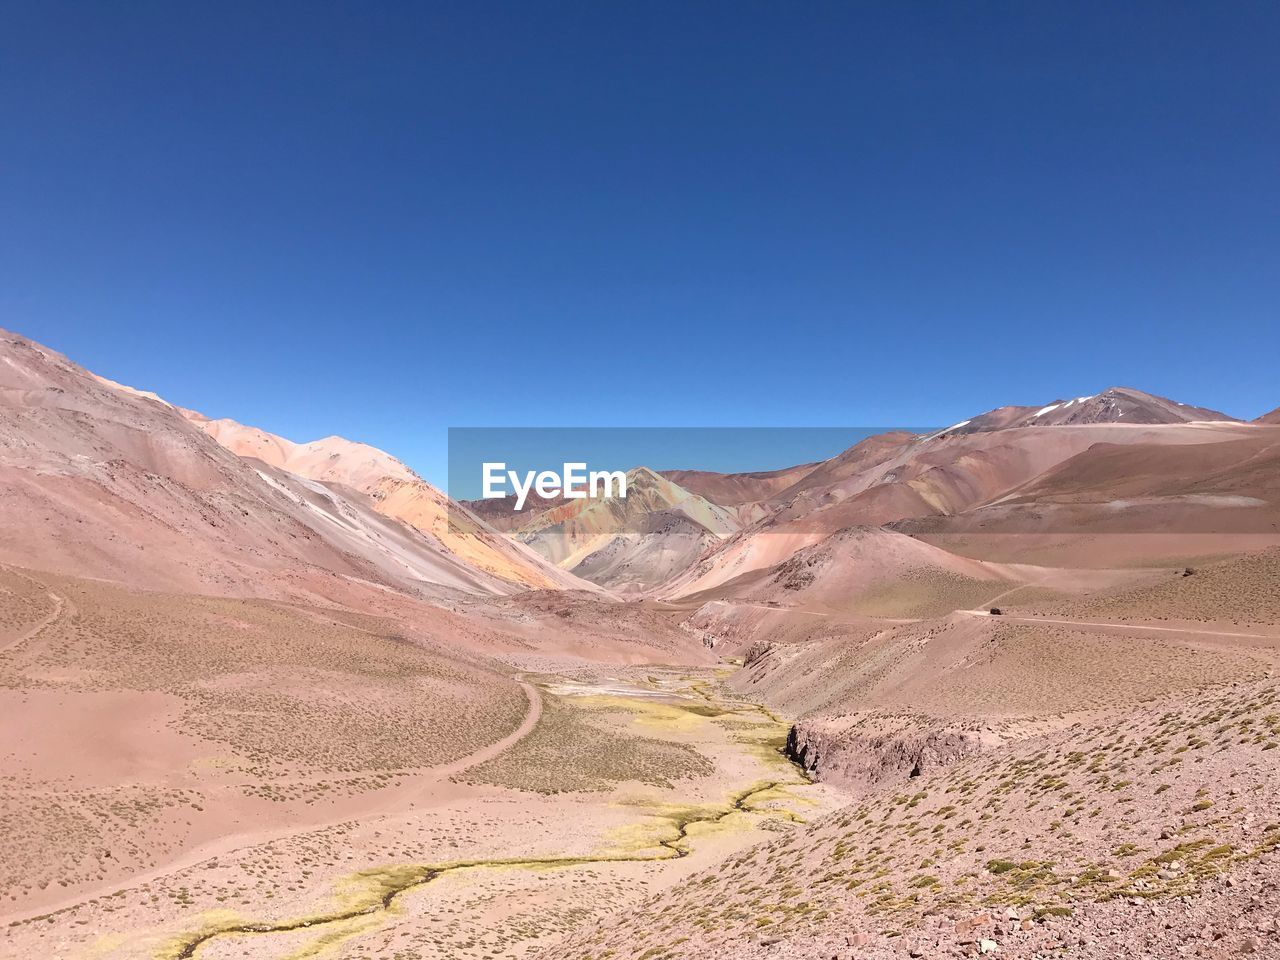 Scenic view of arid landscape and mountain against clear blue sky